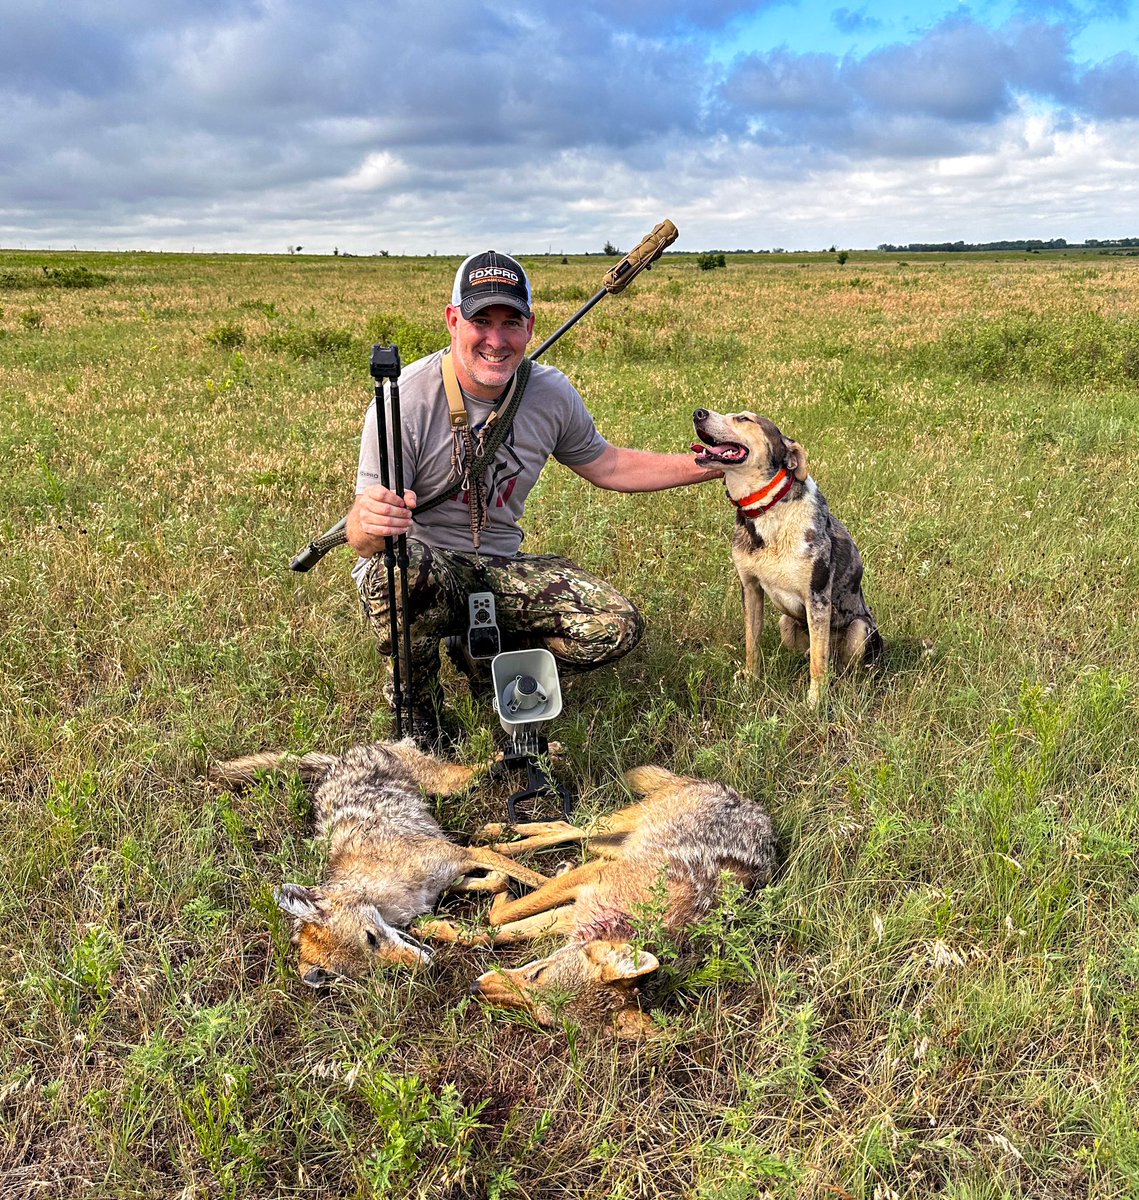 Two-fur Tuesday! FOXPRO’s @jon_collins3 with another double. 

#foxpro #twofurtuesday #coyotehunting #coyotecalling #swaggerbipods #kryptek #ruger #hornady #leupoldcore #huxwrx #mfkgamecalls #onxhunt